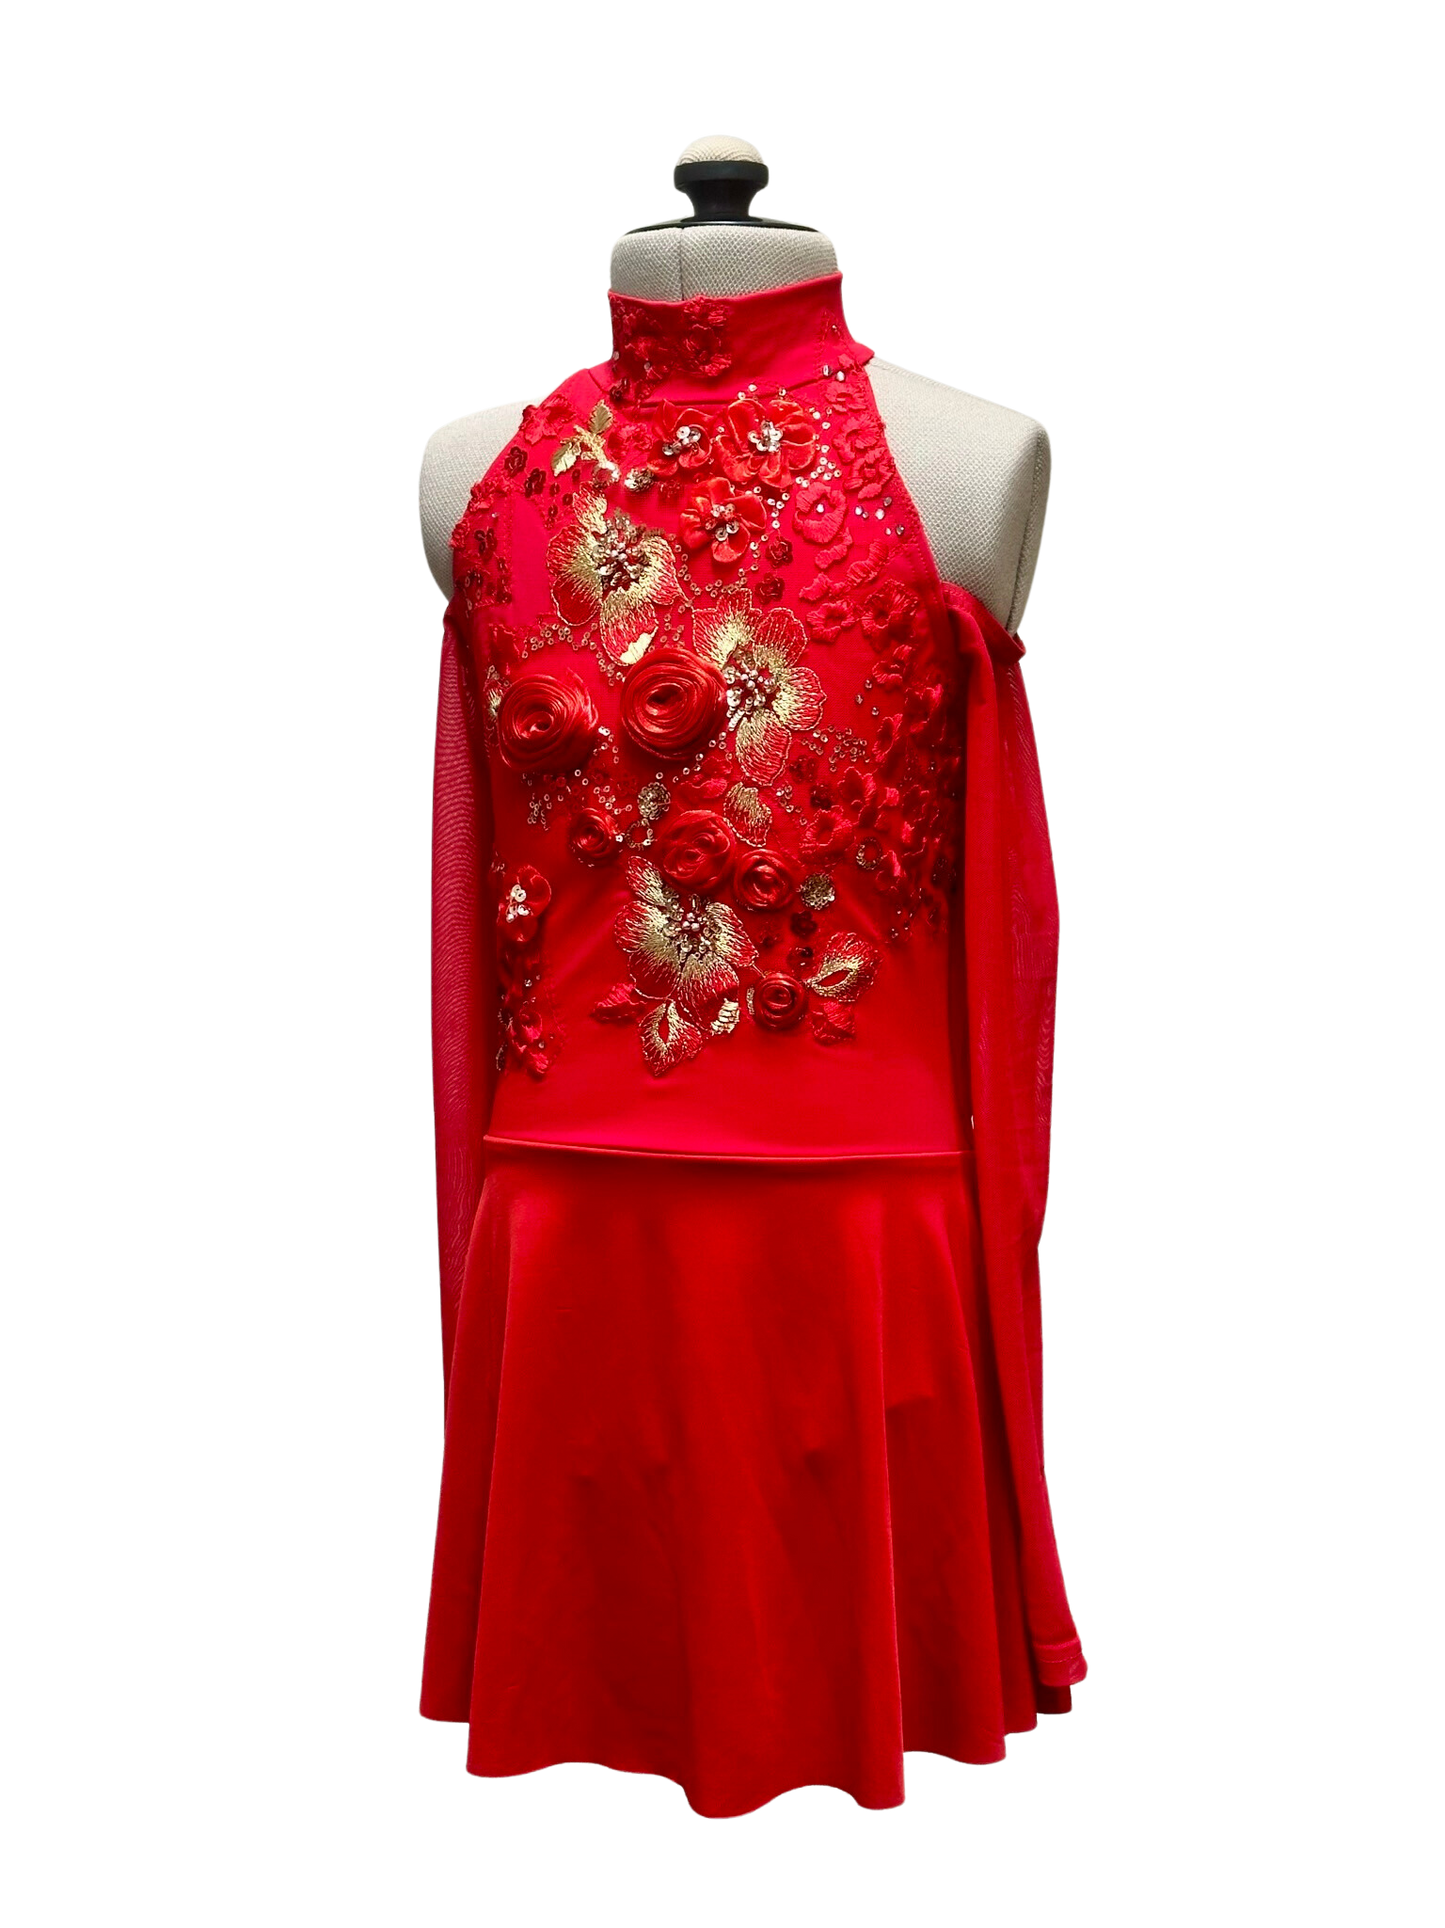 Red Cold Shoulder Dance Costume with Floral Applique and Mesh Details